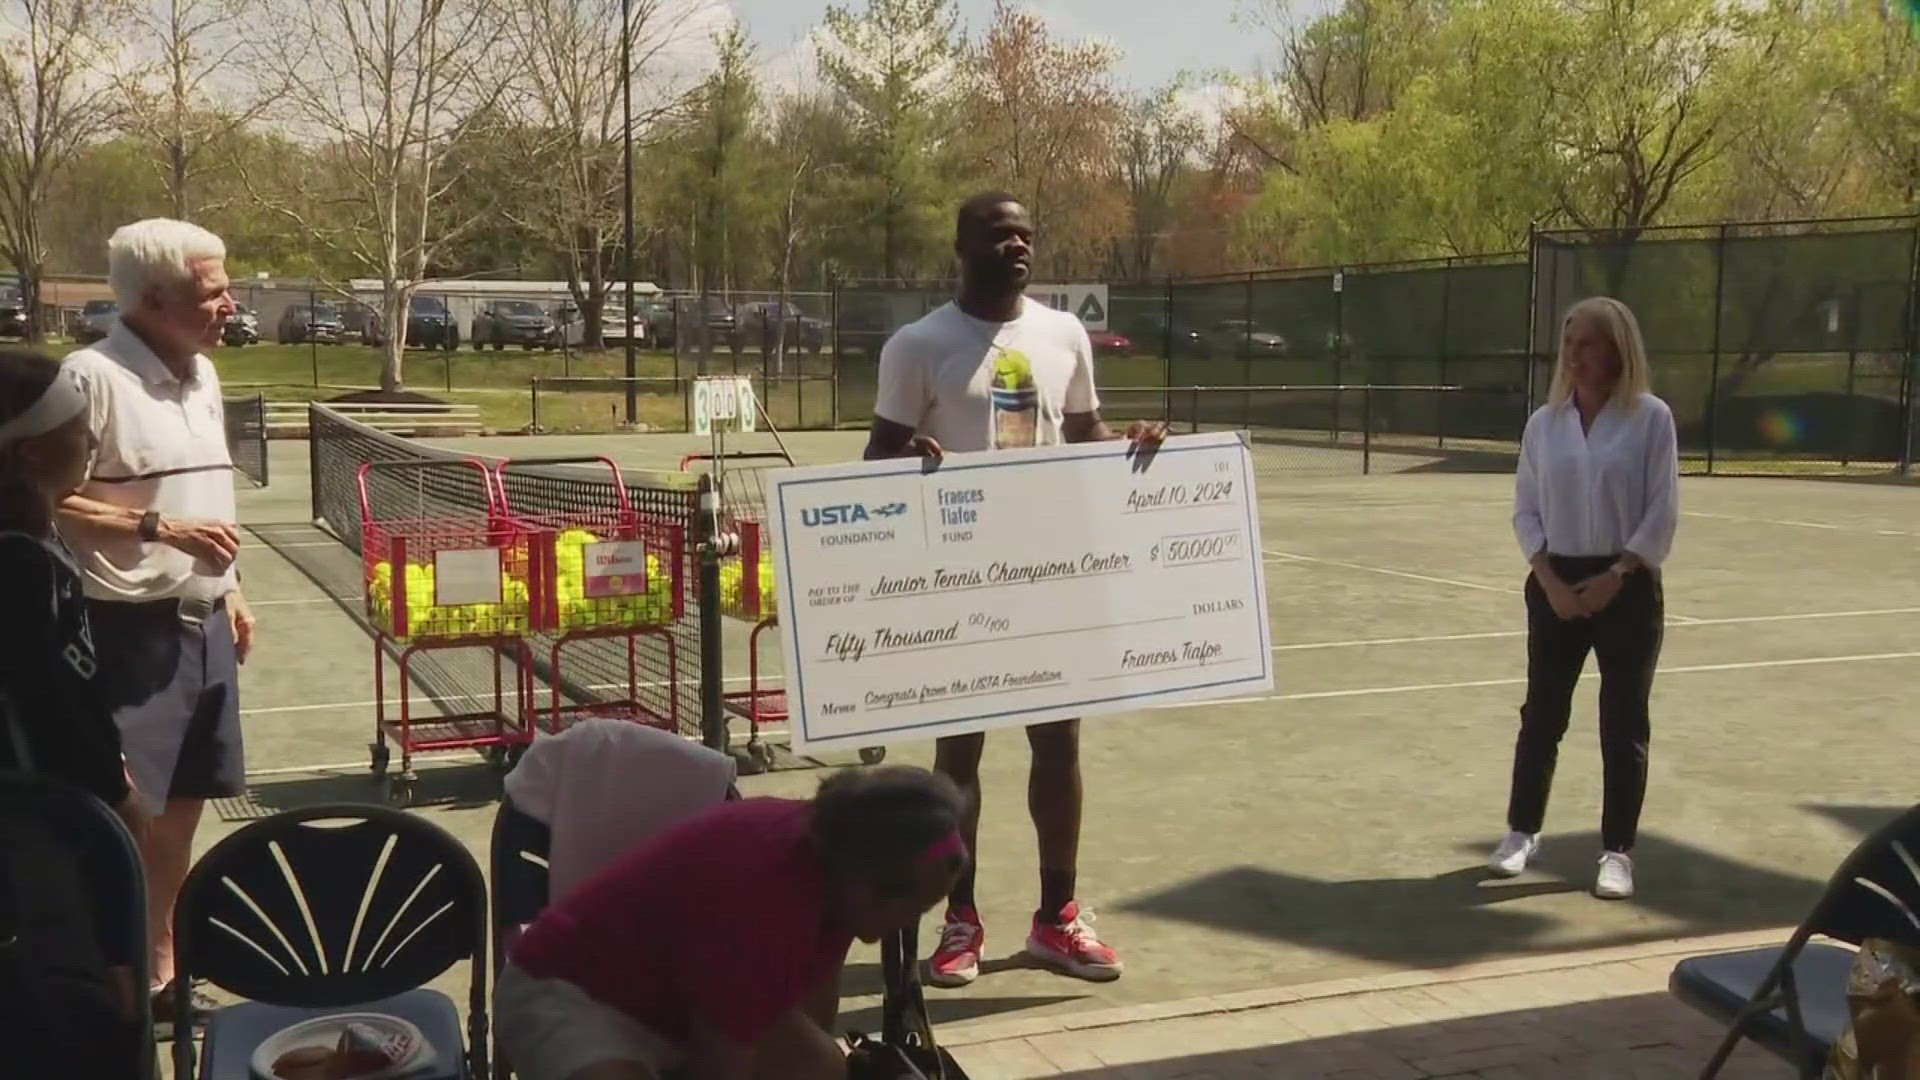 The 26-year-old donated $50K to the junior tennis championship center, where he began lessons at four years old.